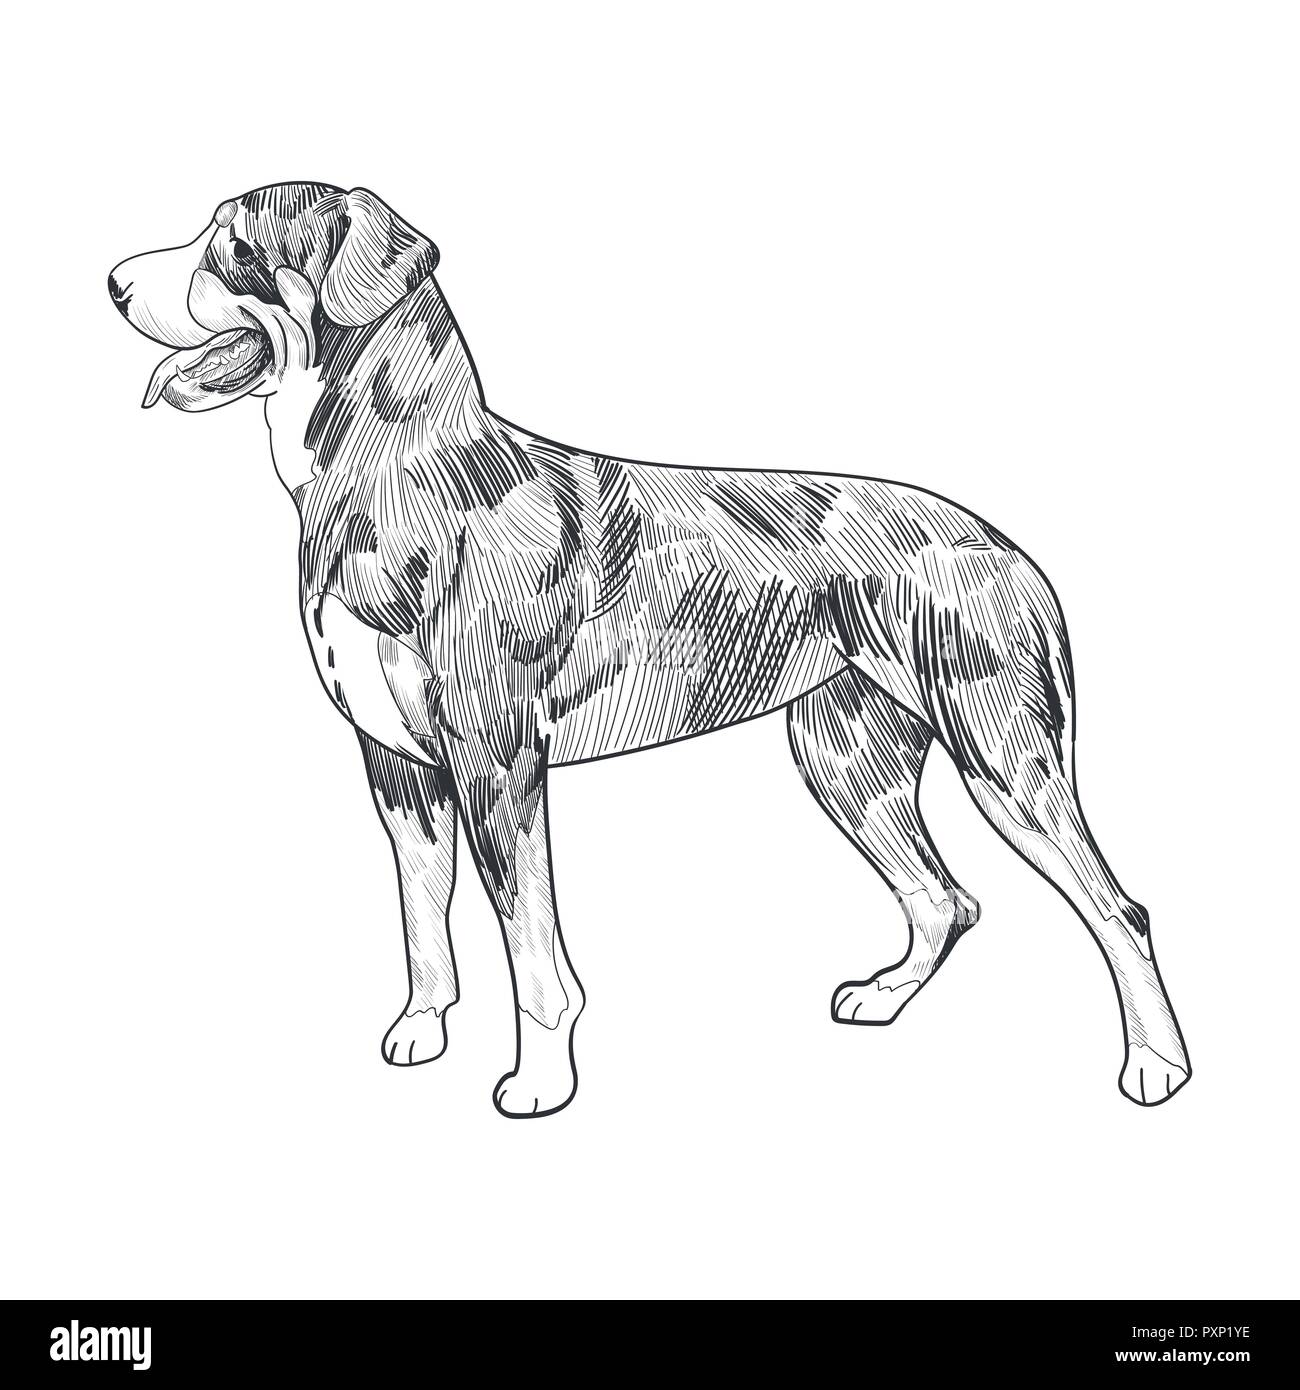 Swiss mountain dog hand drawn sketch isolated on white background. Purebred dog panting. Outline sketch of popular swiss dog breed. Stock Vector